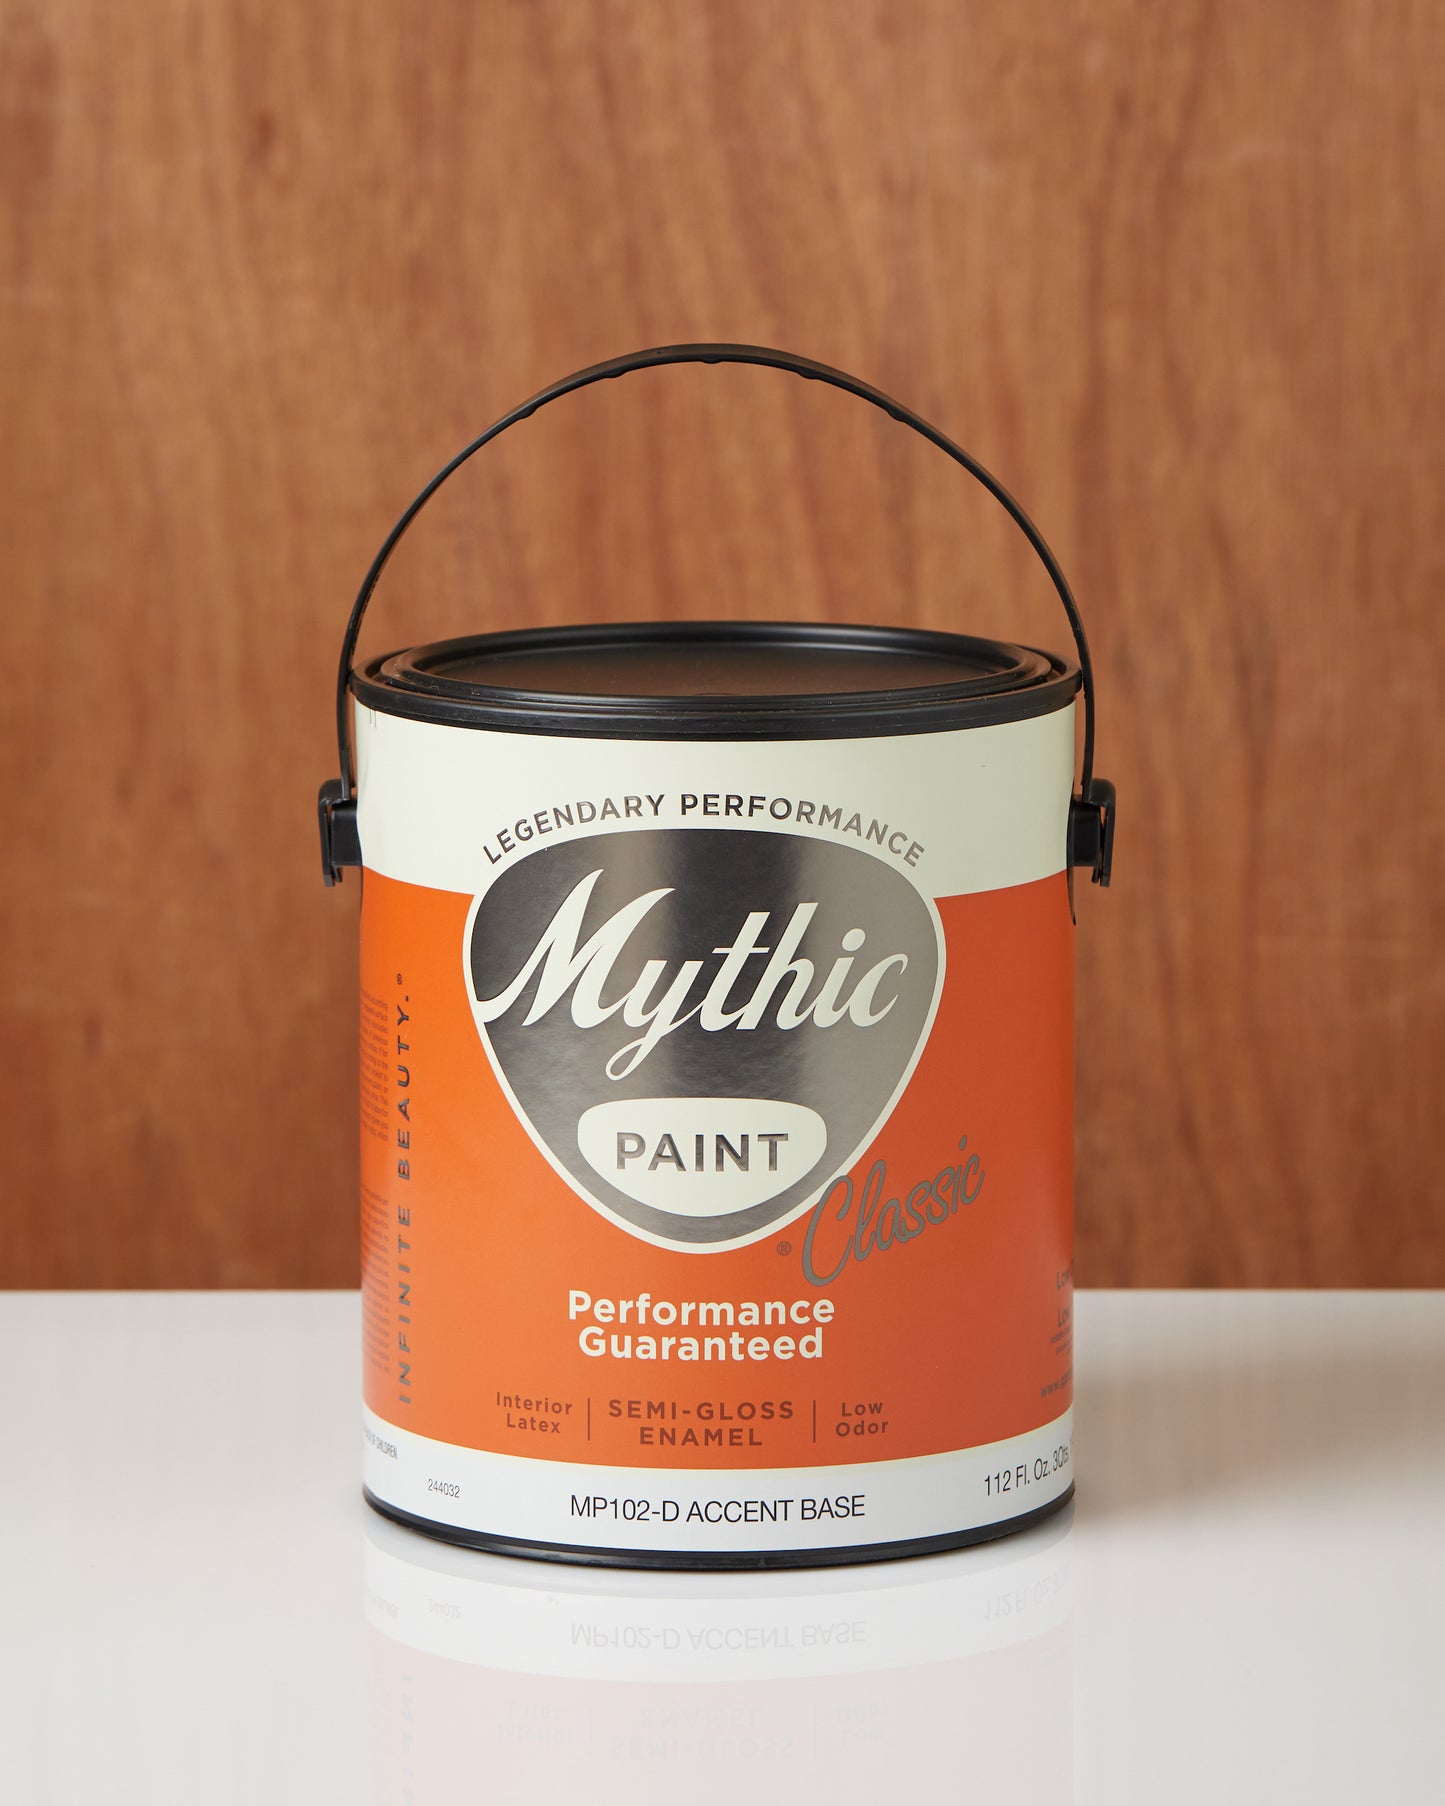 Mythic Paint - Classic Interior Latex Low Odor Paint